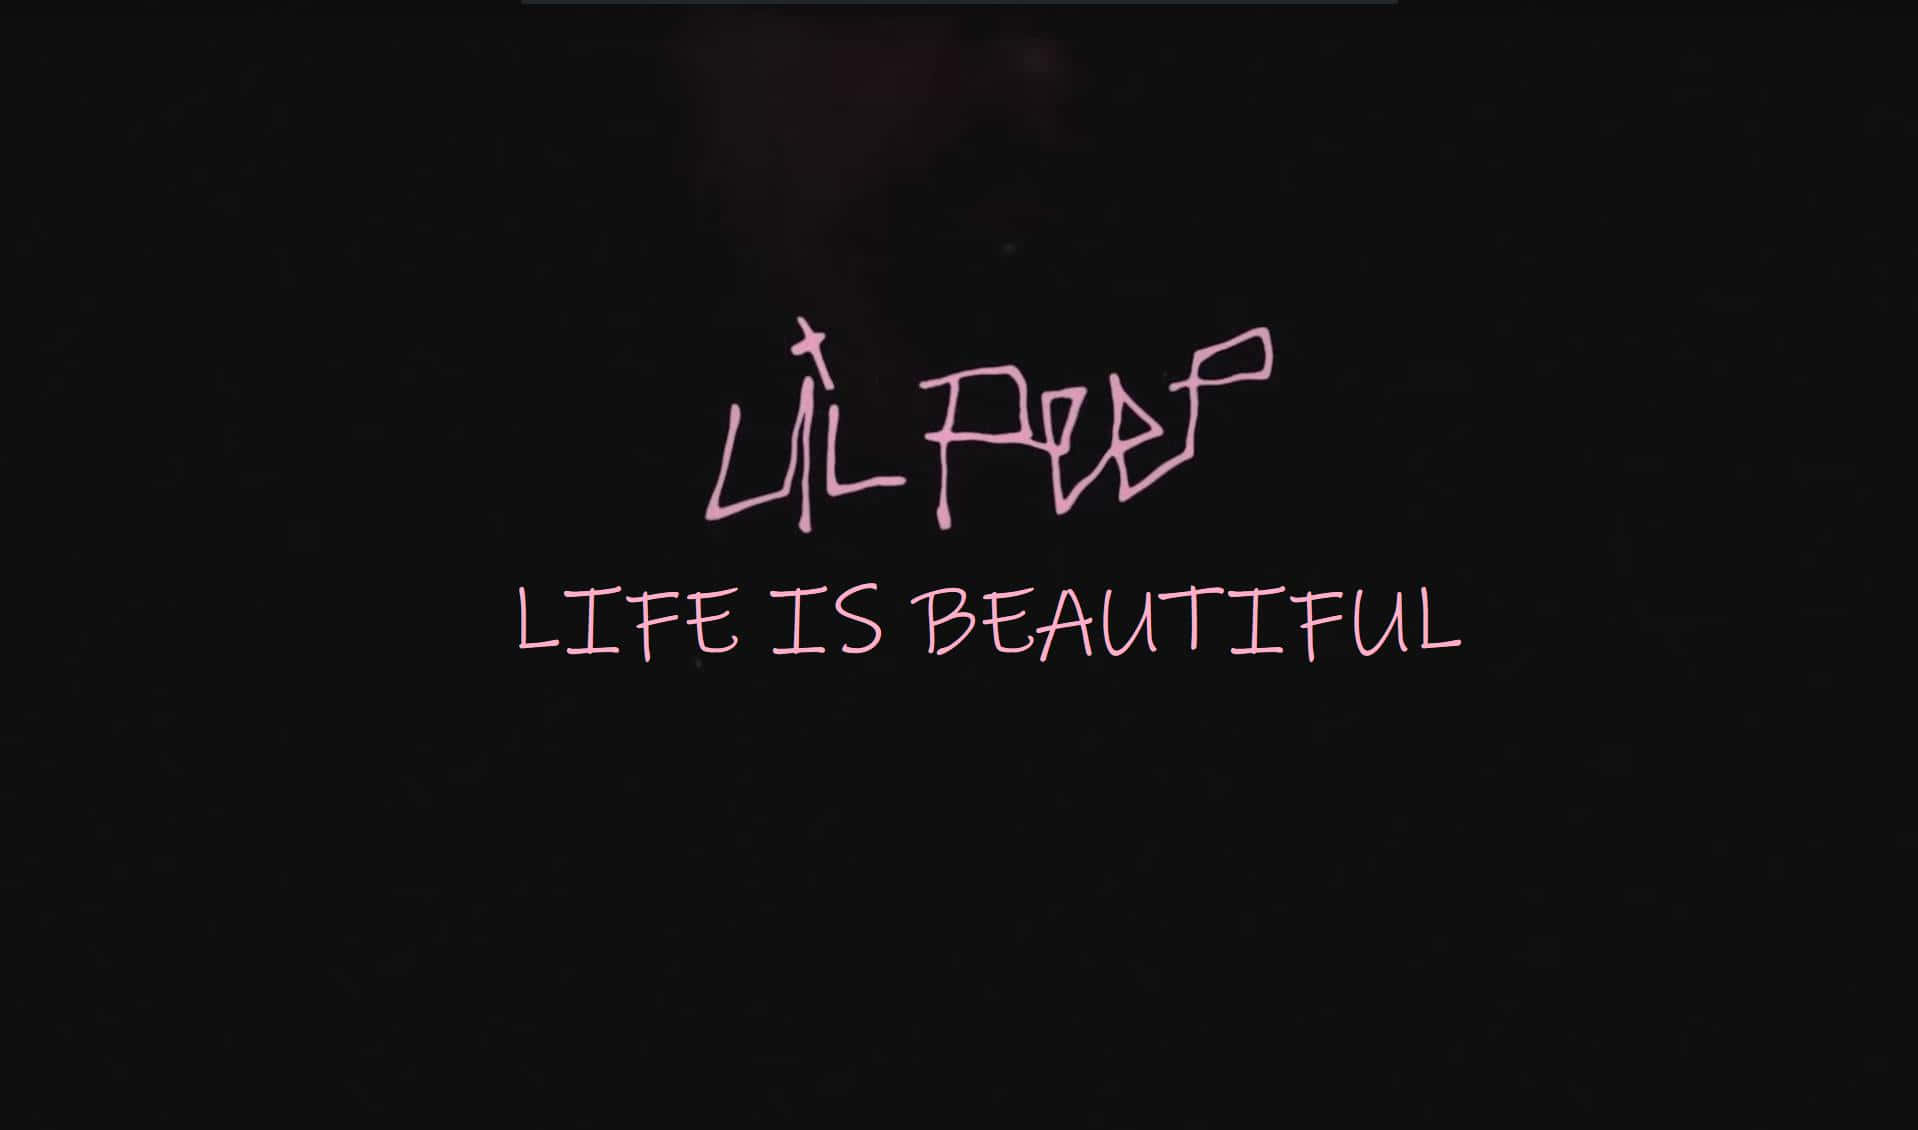 "The official logo of Lil Peep, an American singer and rapper." Wallpaper